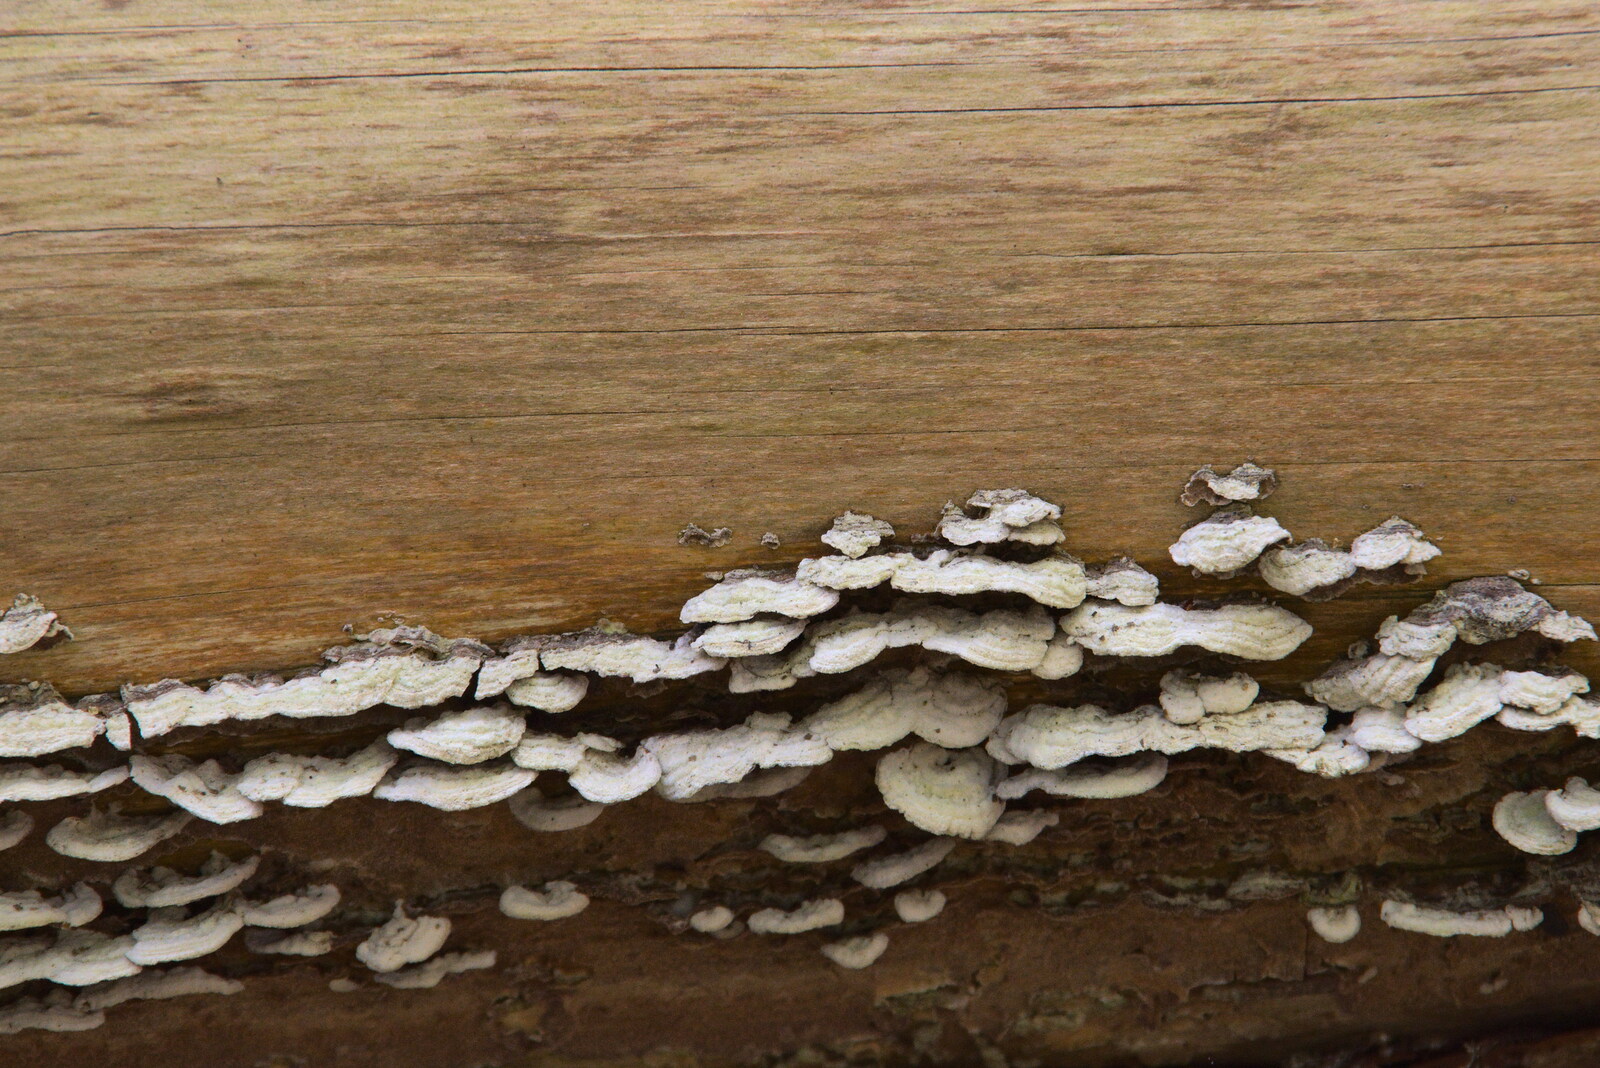 Lines of fungus on a tree stump from A Vaccination Afternoon, Swaffham, Norfolk - 9th May 2021